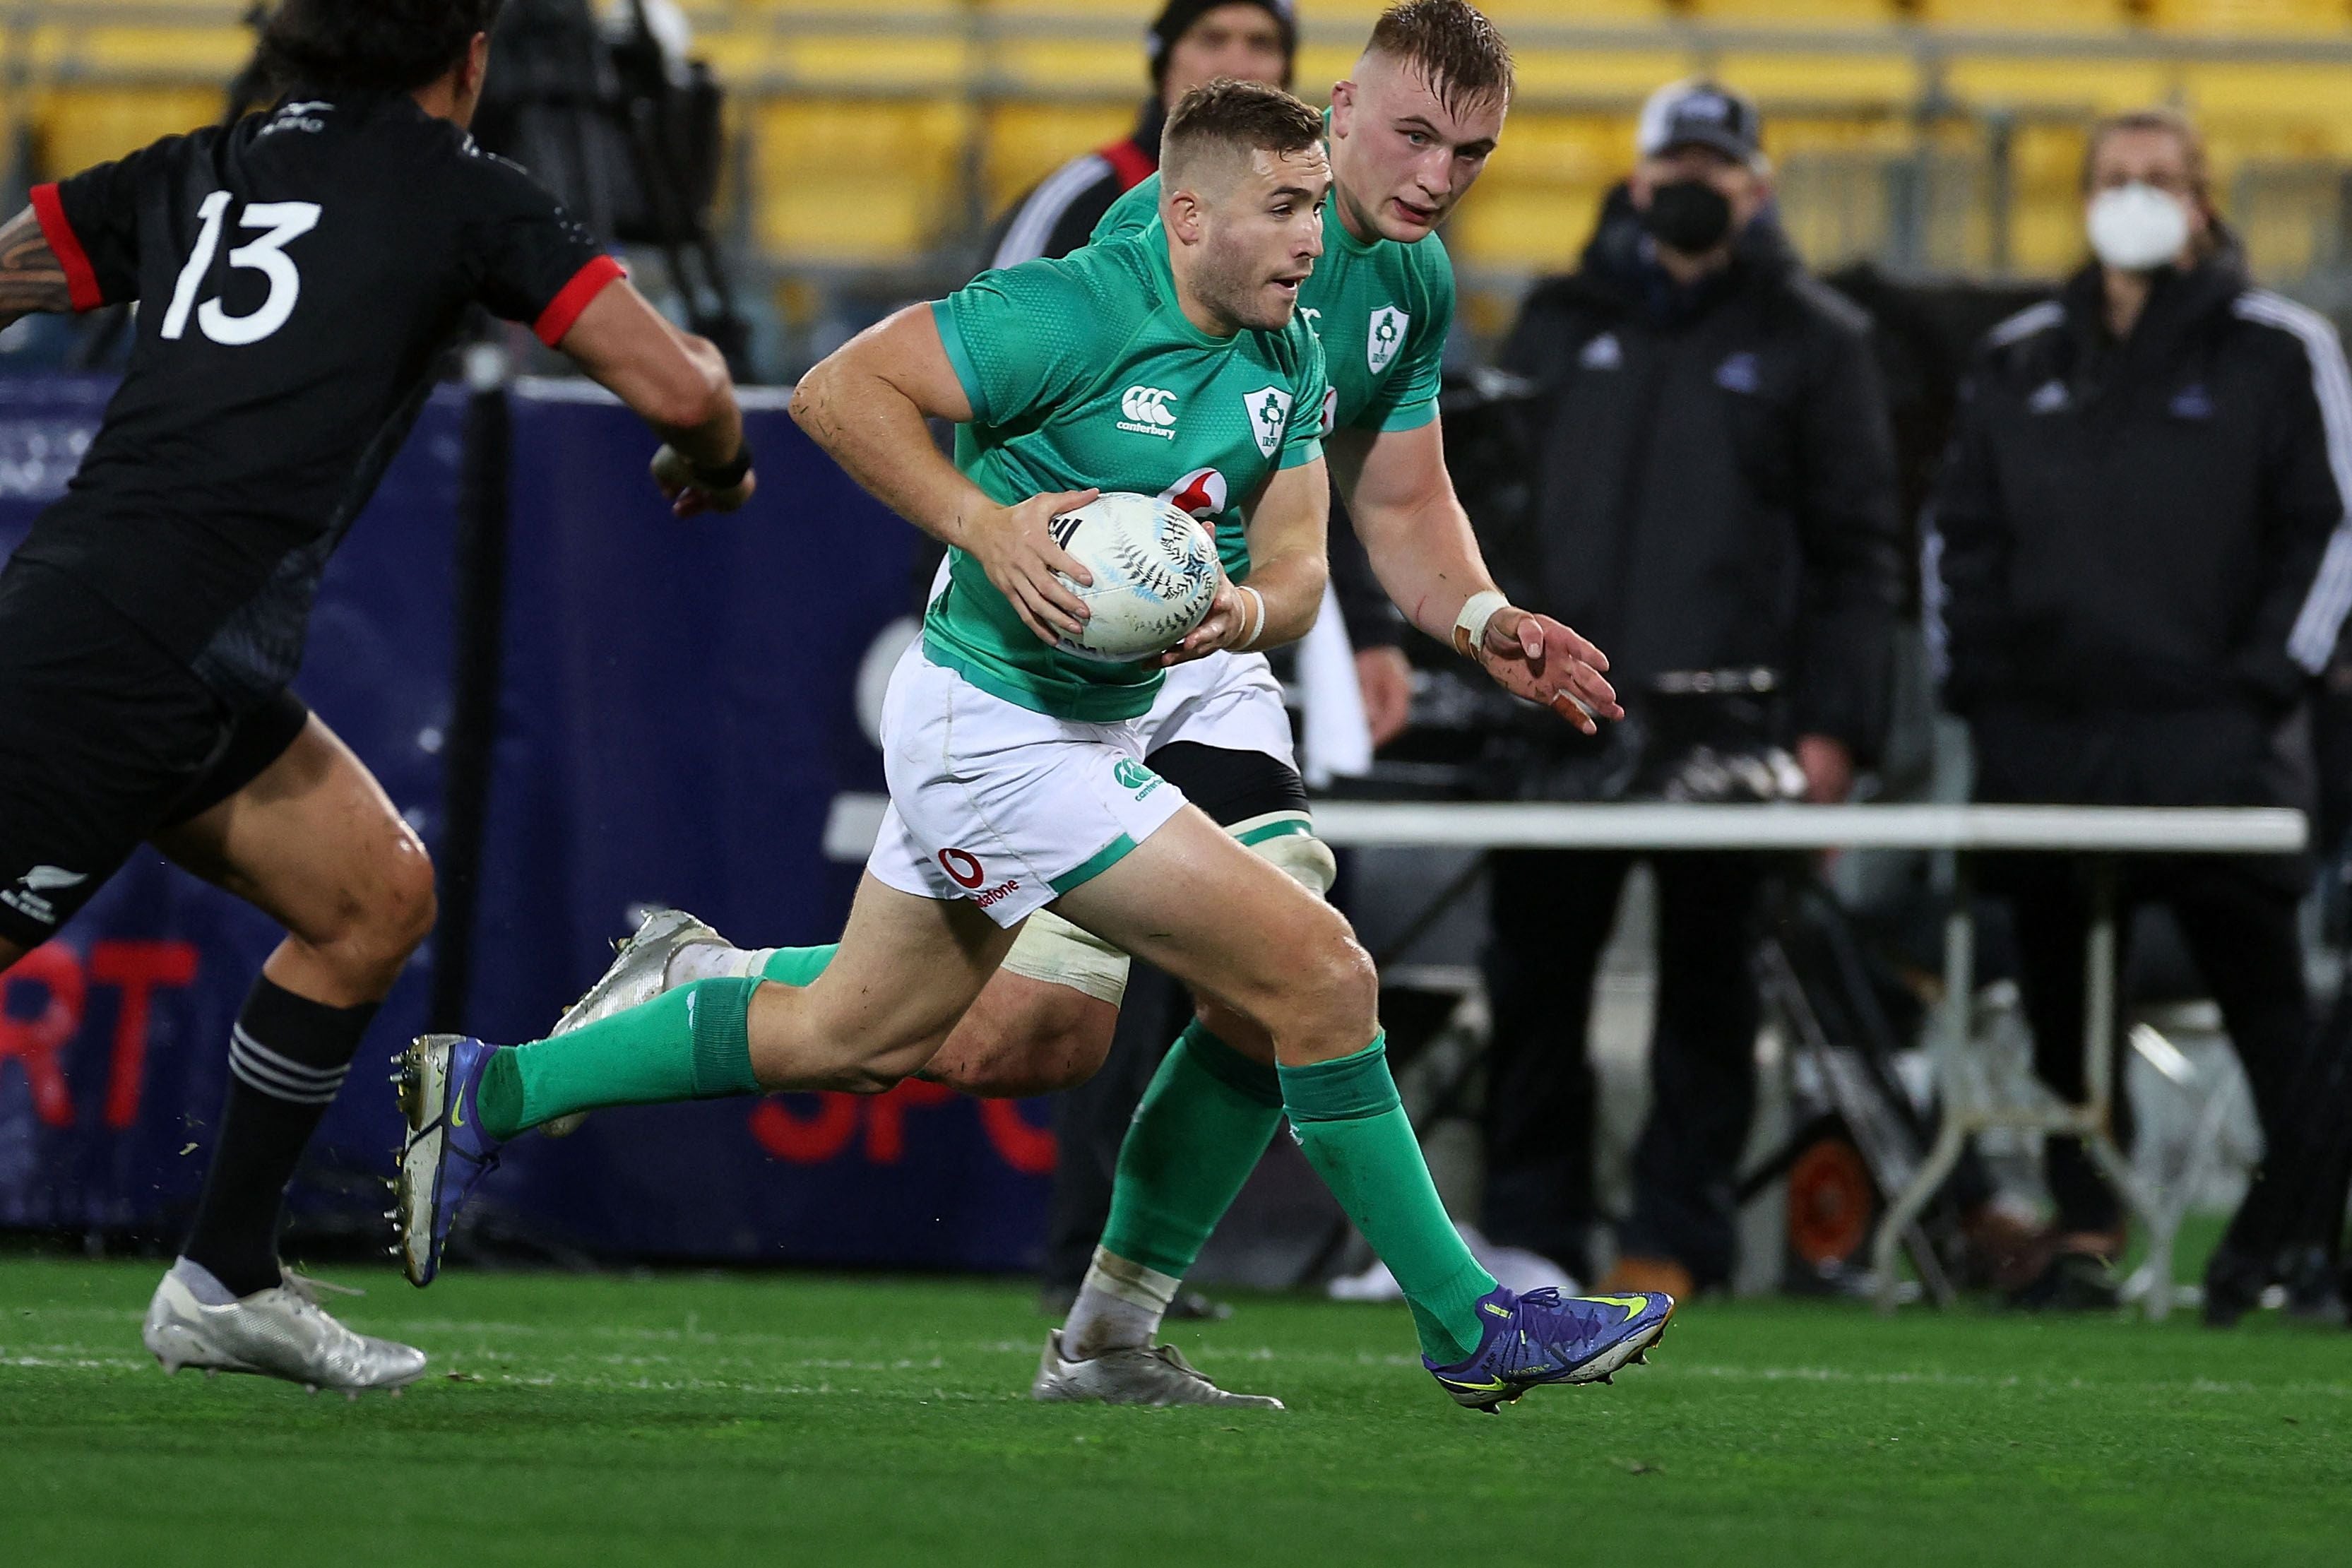 Jordan Larmour impressed with two tries for Ireland